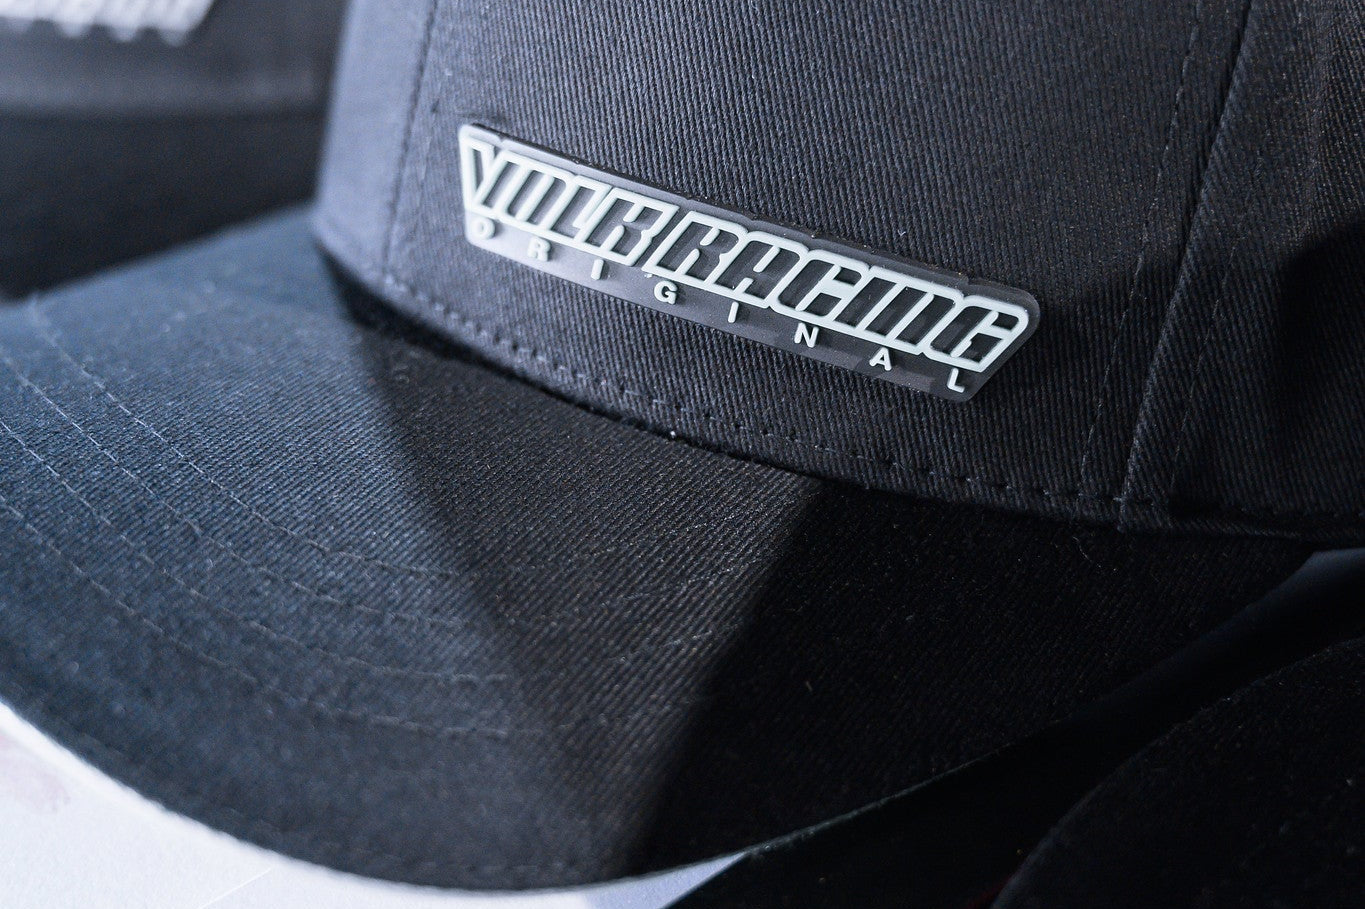 Volk Racing Original Snap Back - Premium Merchandise from Merch - From just $45.00! Shop now at MK MOTORSPORTS